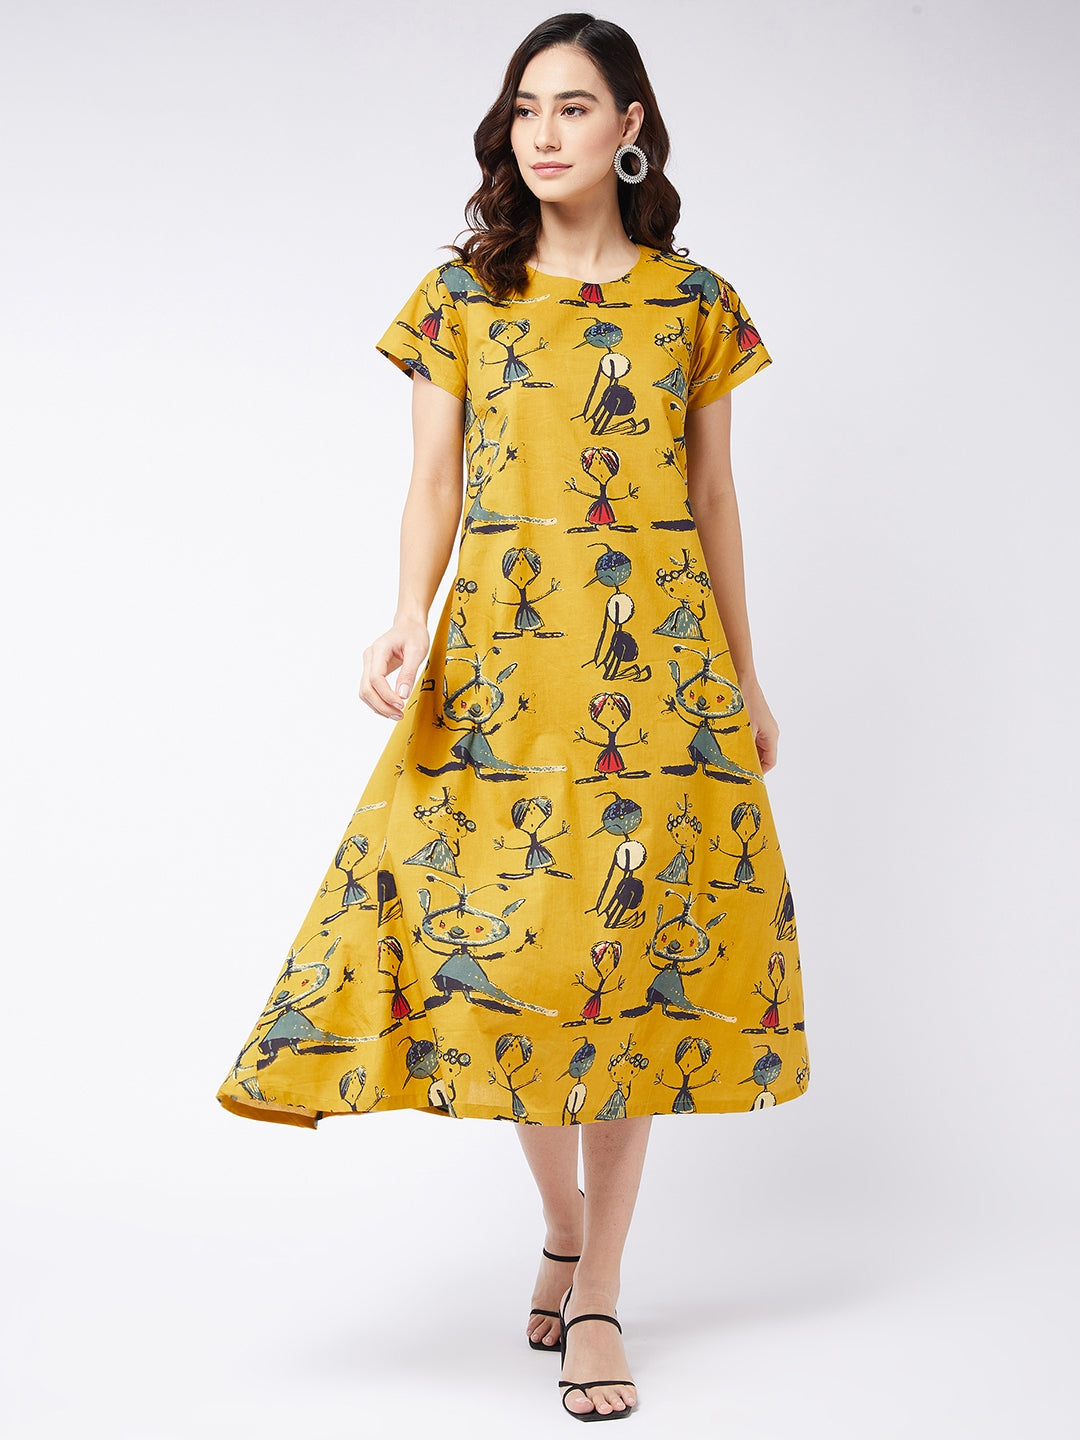 Quirky A-Line Dress